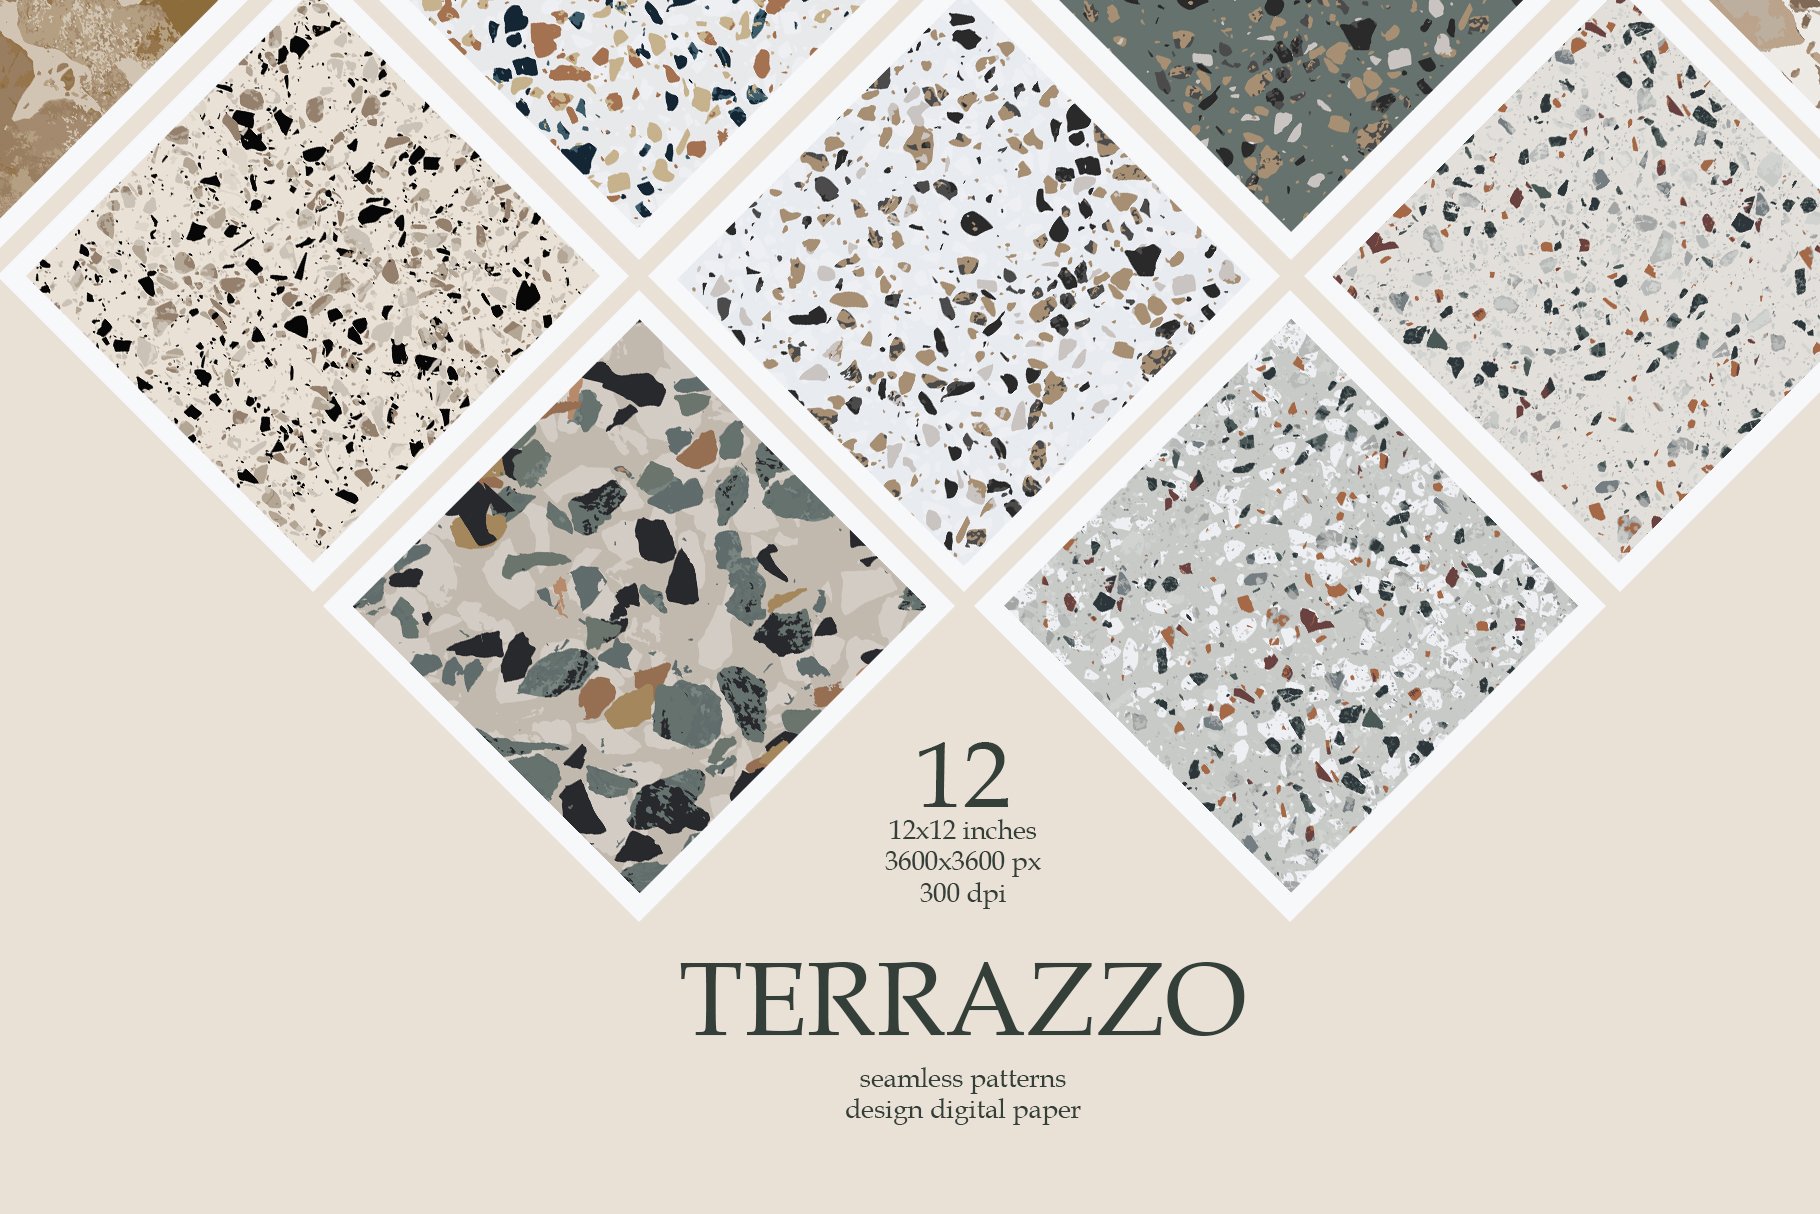 12 Terrazzo Seamless Patterns cover image.